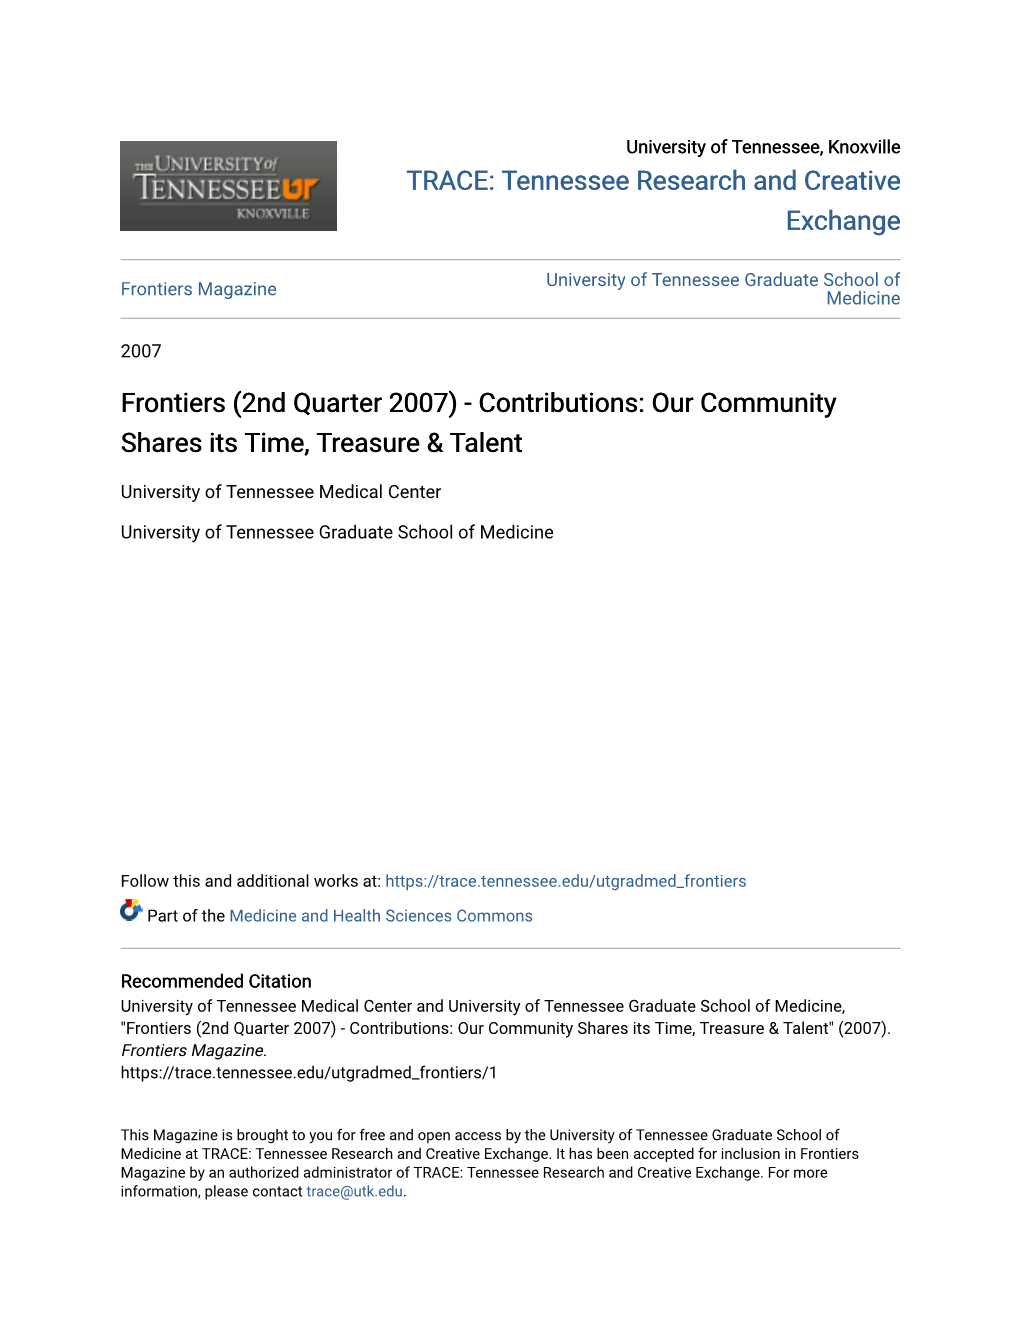 Frontiers (2Nd Quarter 2007) - Contributions: Our Community Shares Its Time, Treasure & Talent